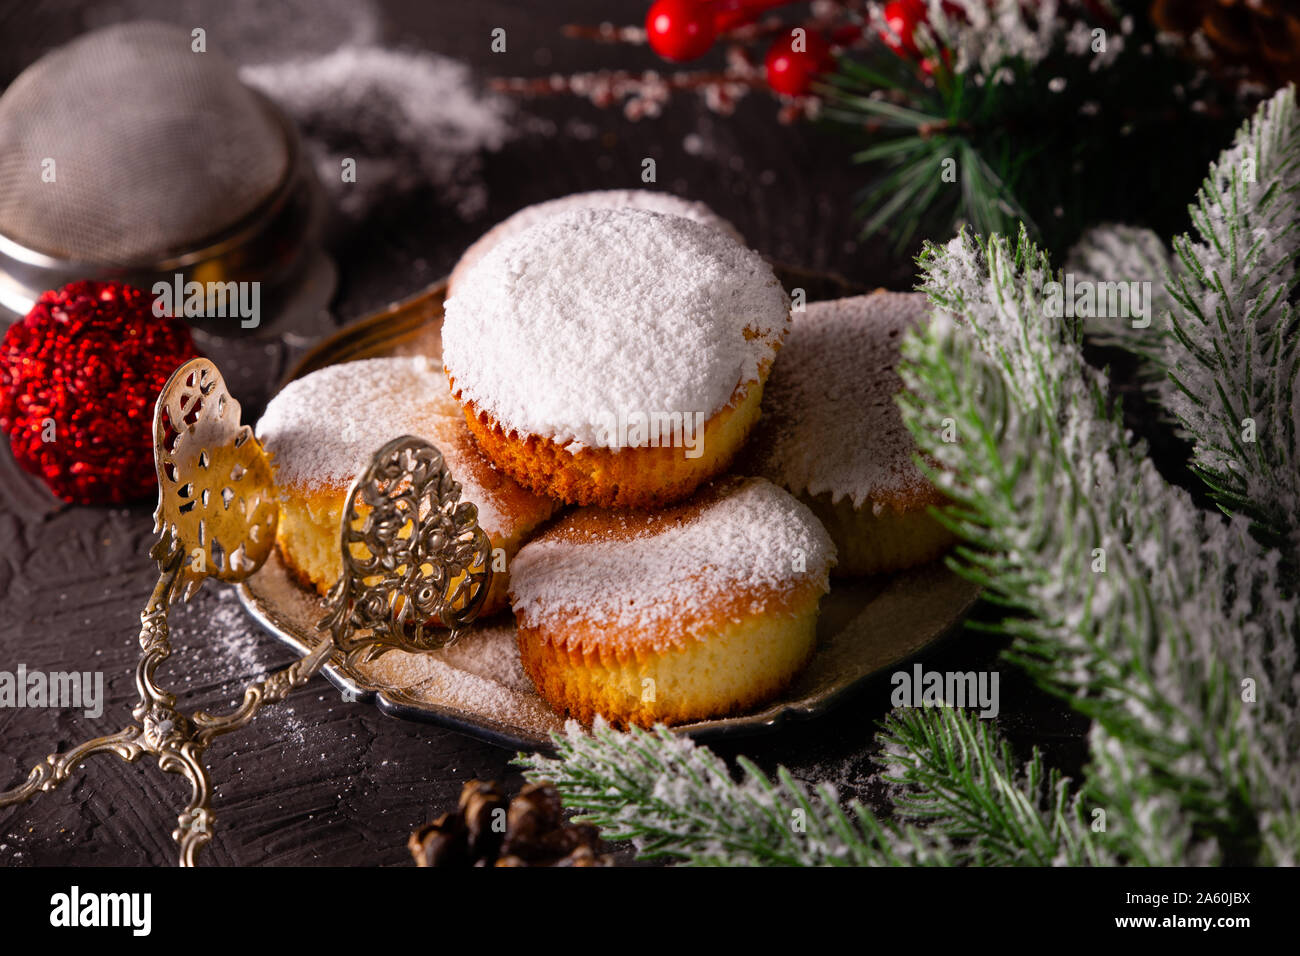 Christmas concept with sweets and accessories on the table Stock Photo